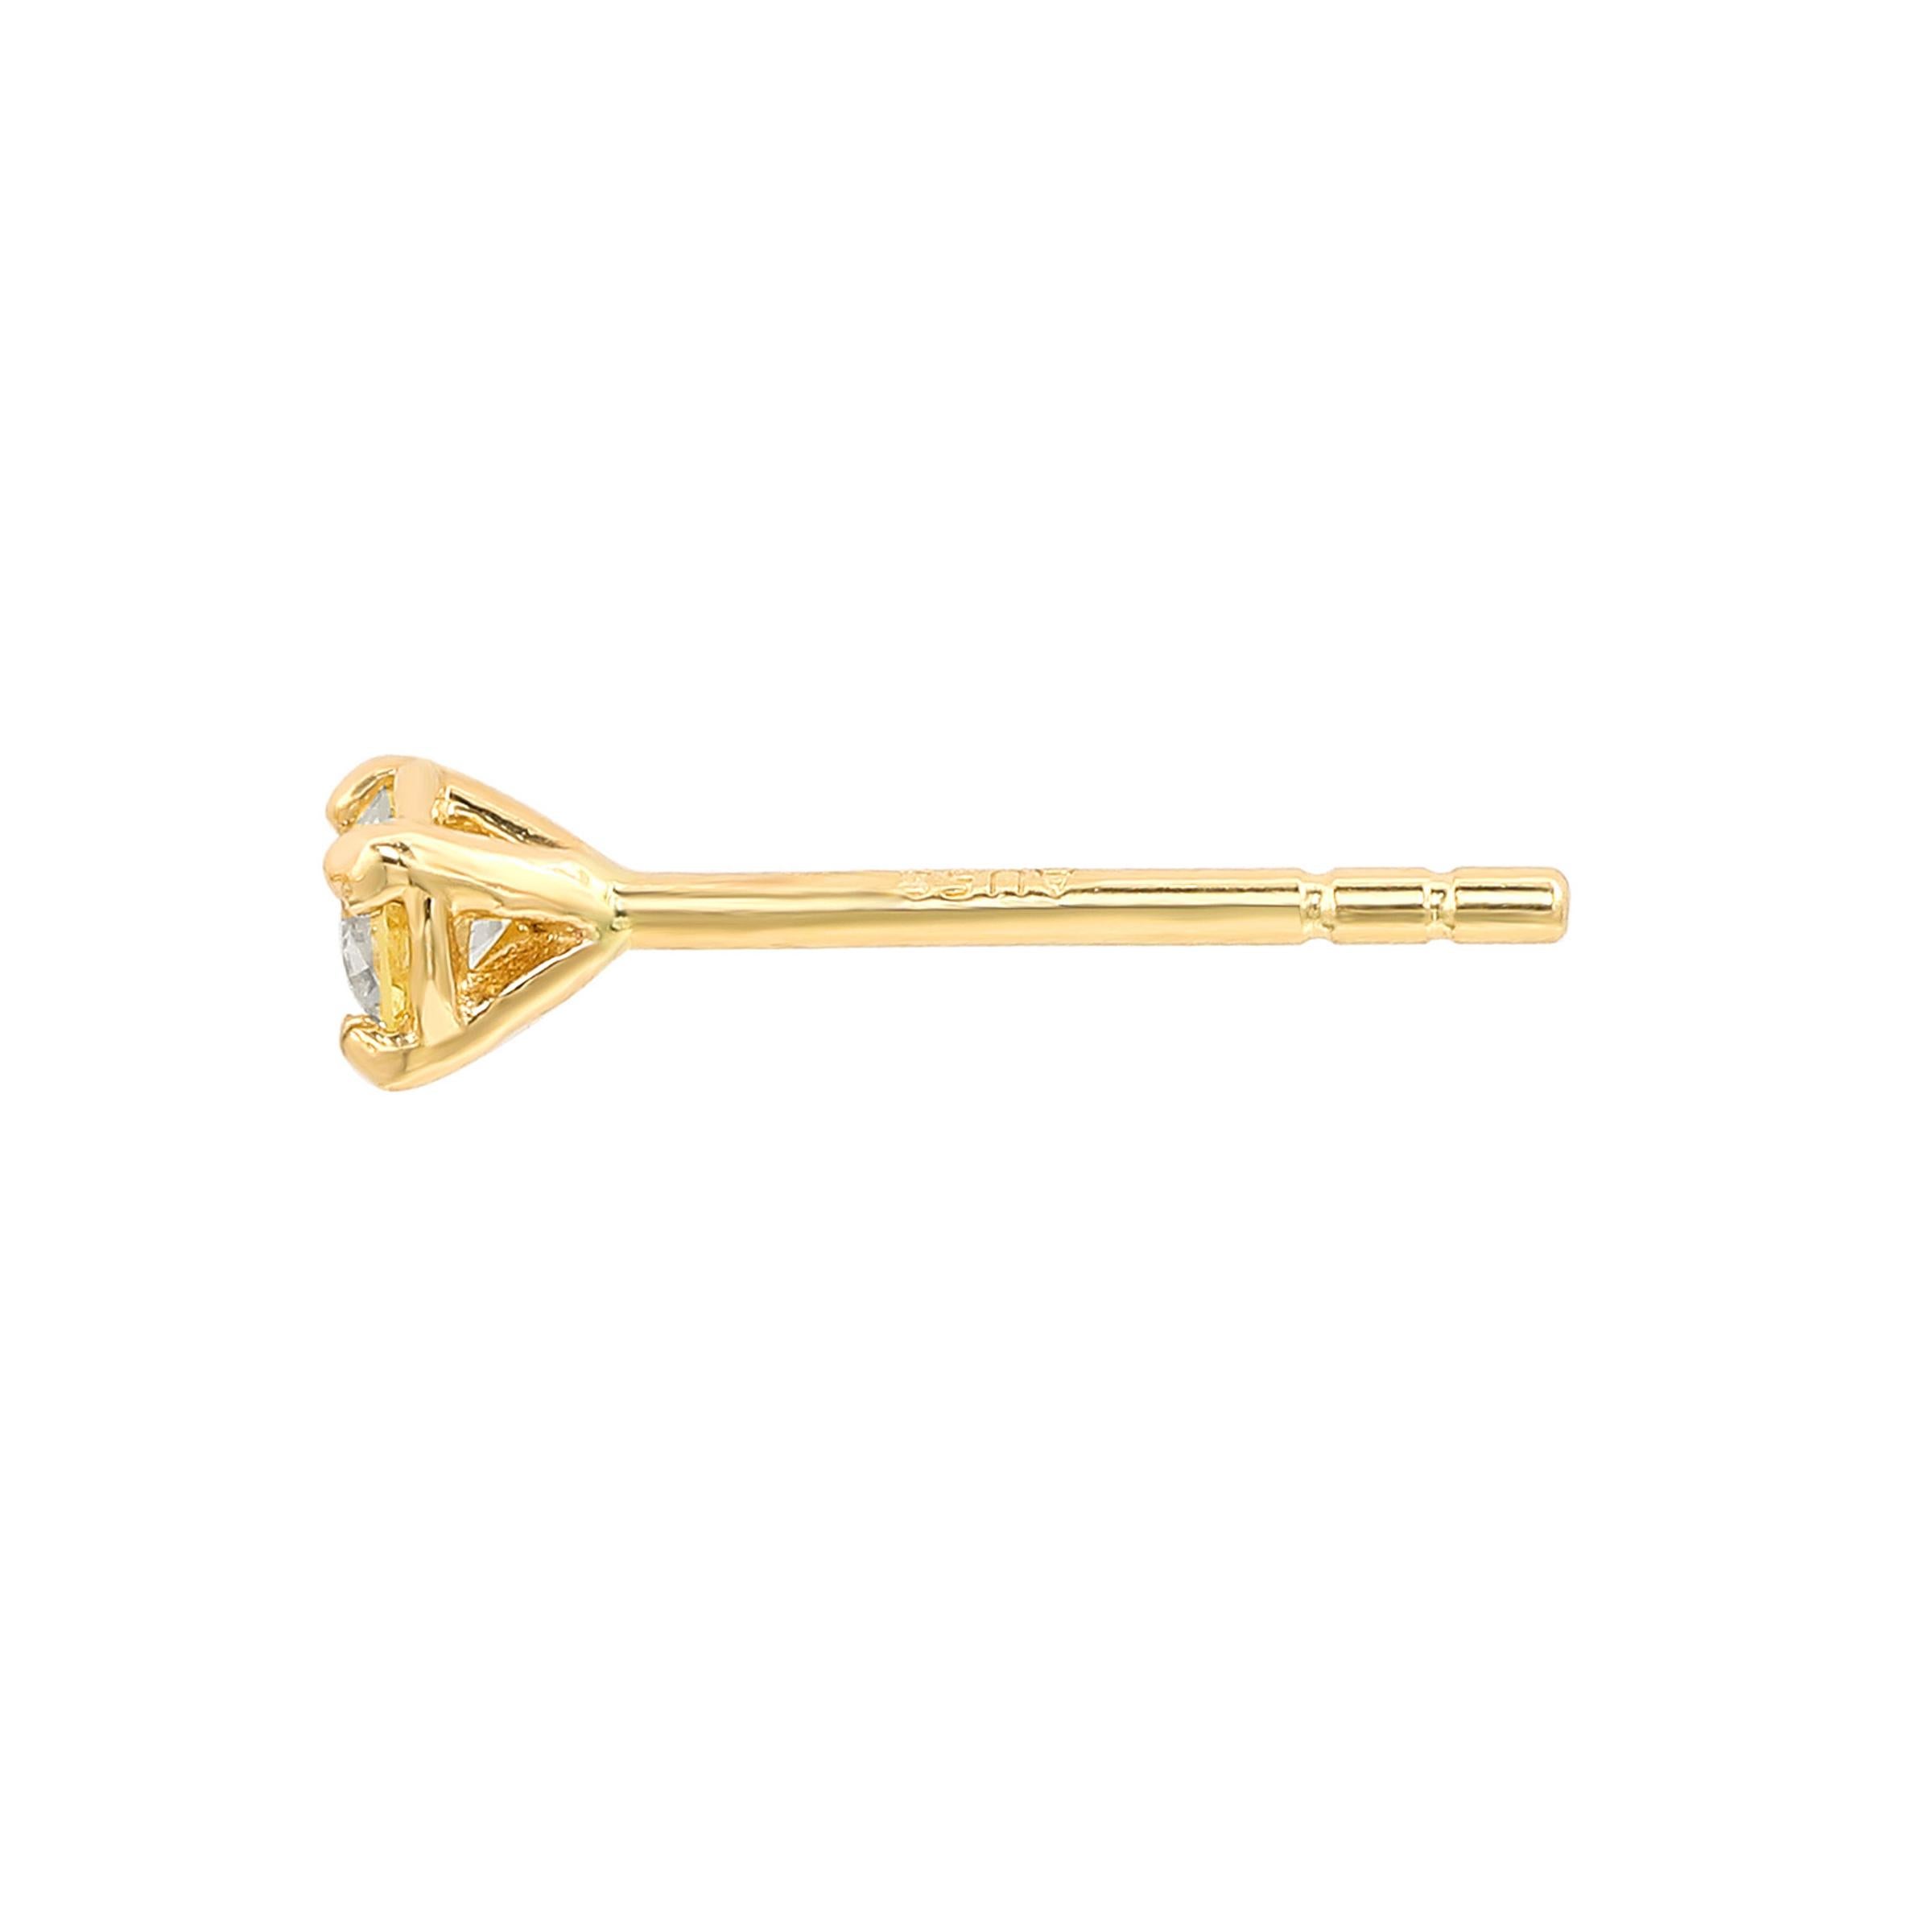 Perfect as a second or third piercing. Add an elegant accent to your outfit with this sparkling stud earring featuring one gorgeous white diamond in a prong setting. Crafted in 14-karat yellow gold, this earring has a high polish finish and